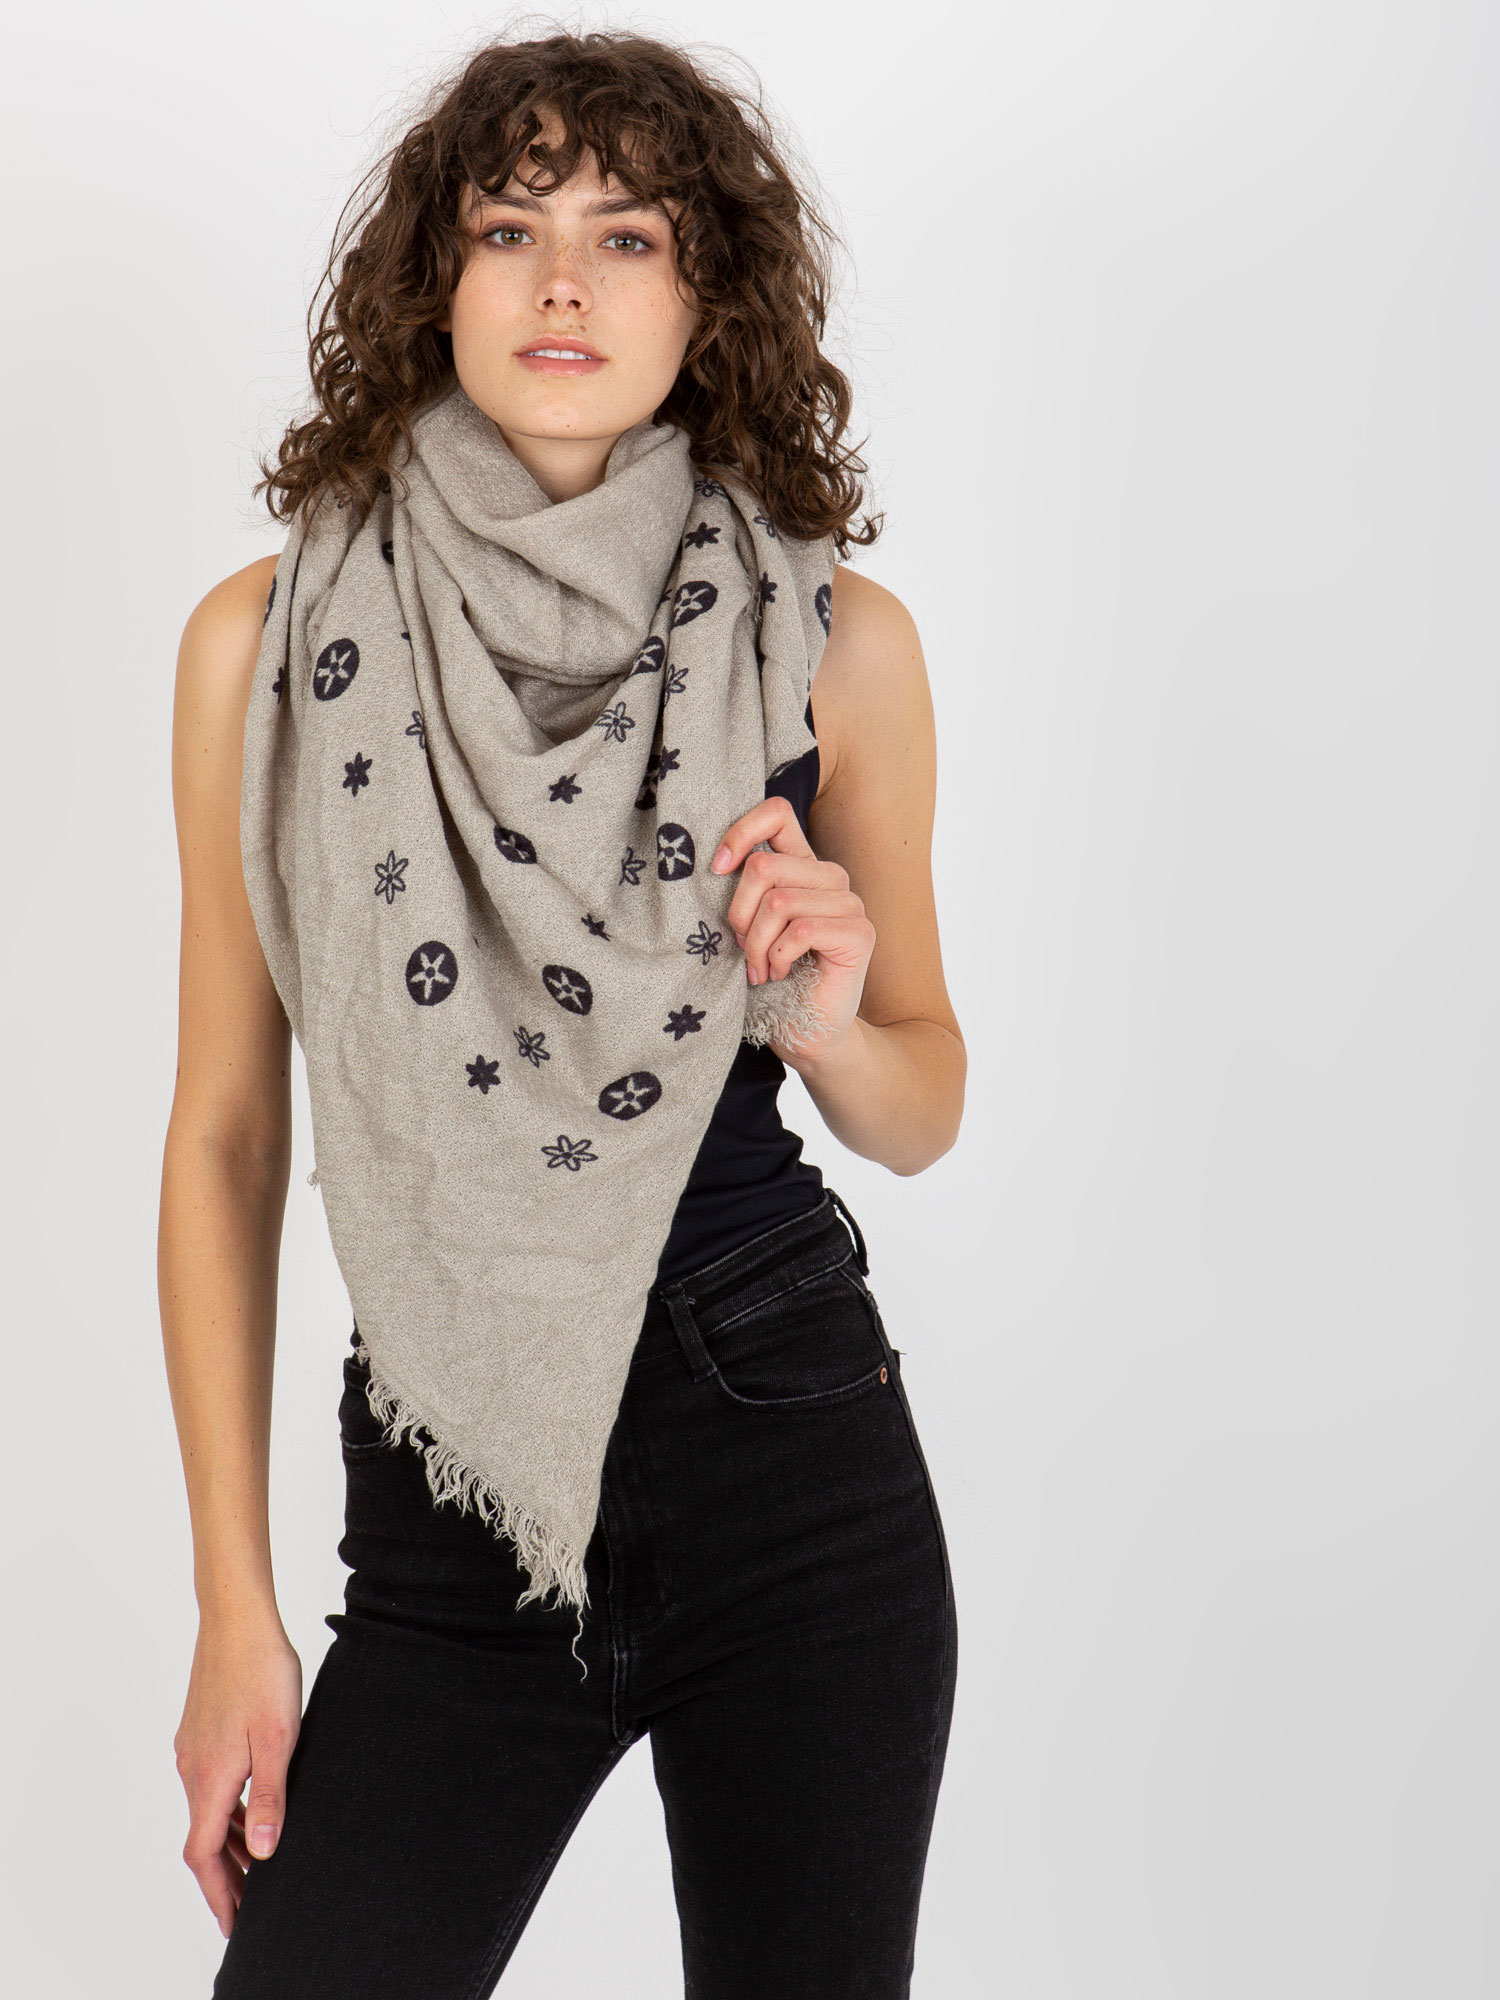 Women's scarf with print - gray